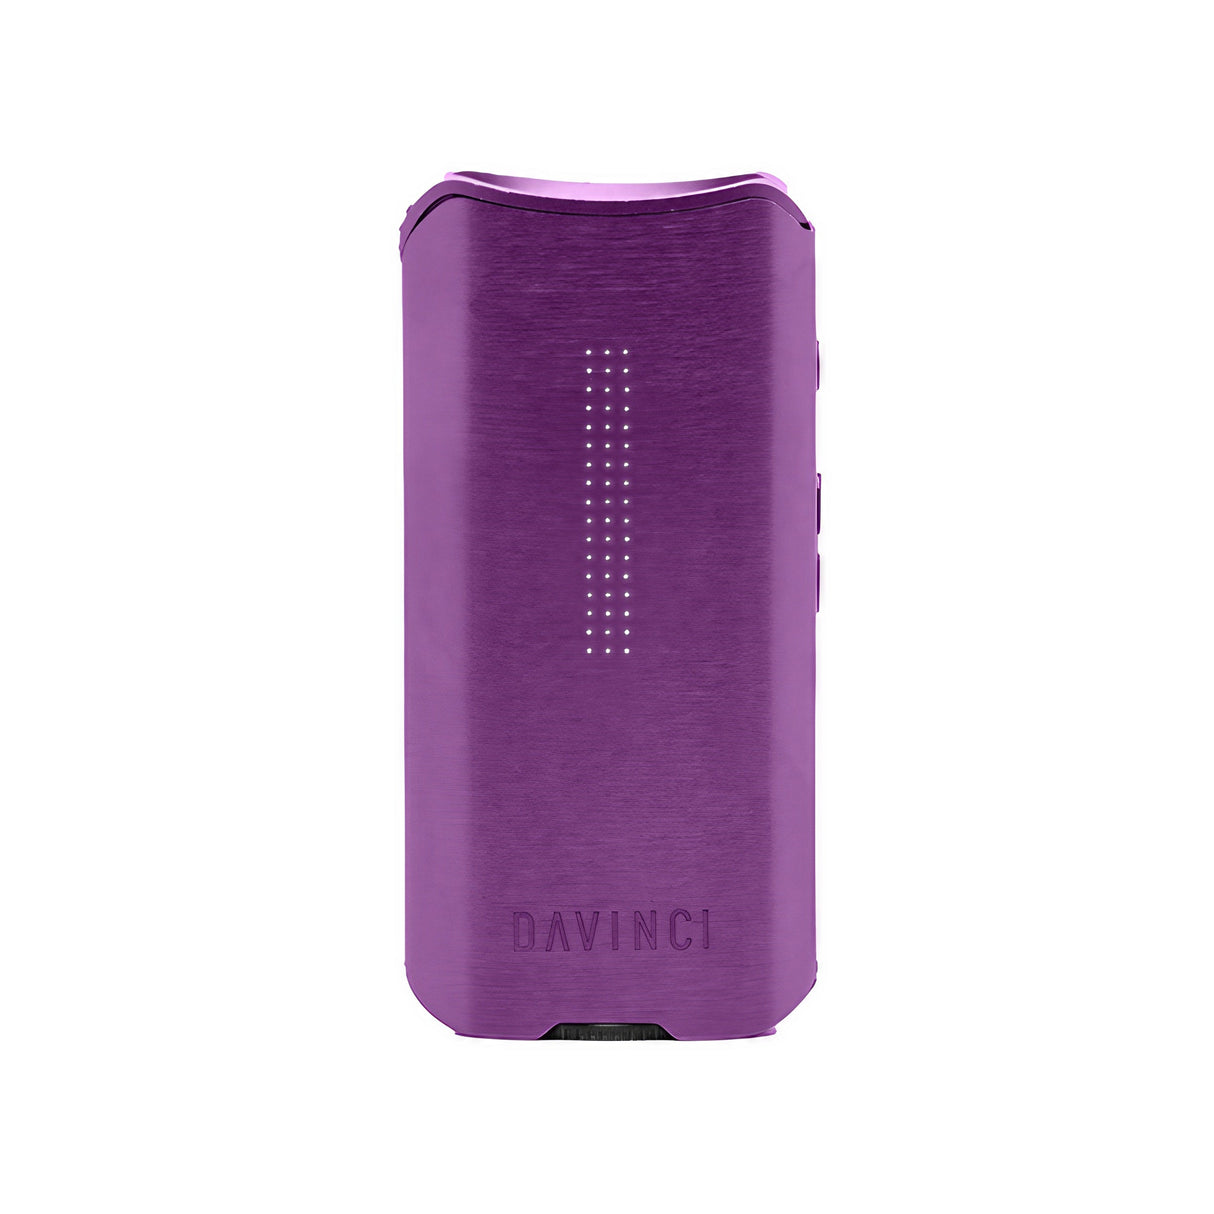 DaVinci IQ2 Vaporizer in Purple - Front View on White Background, Portable Design for Dry Herbs and Concentrates